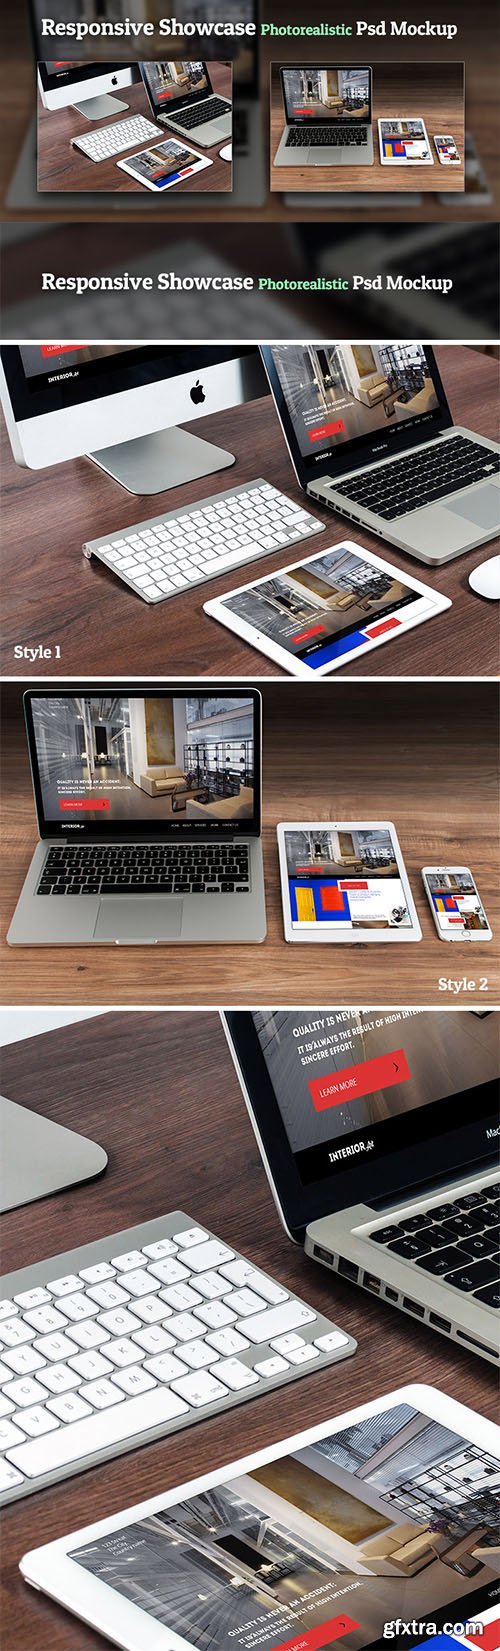 Responsive Showcase Photorealistic PSD Mock-Up\'s - Apple Devices